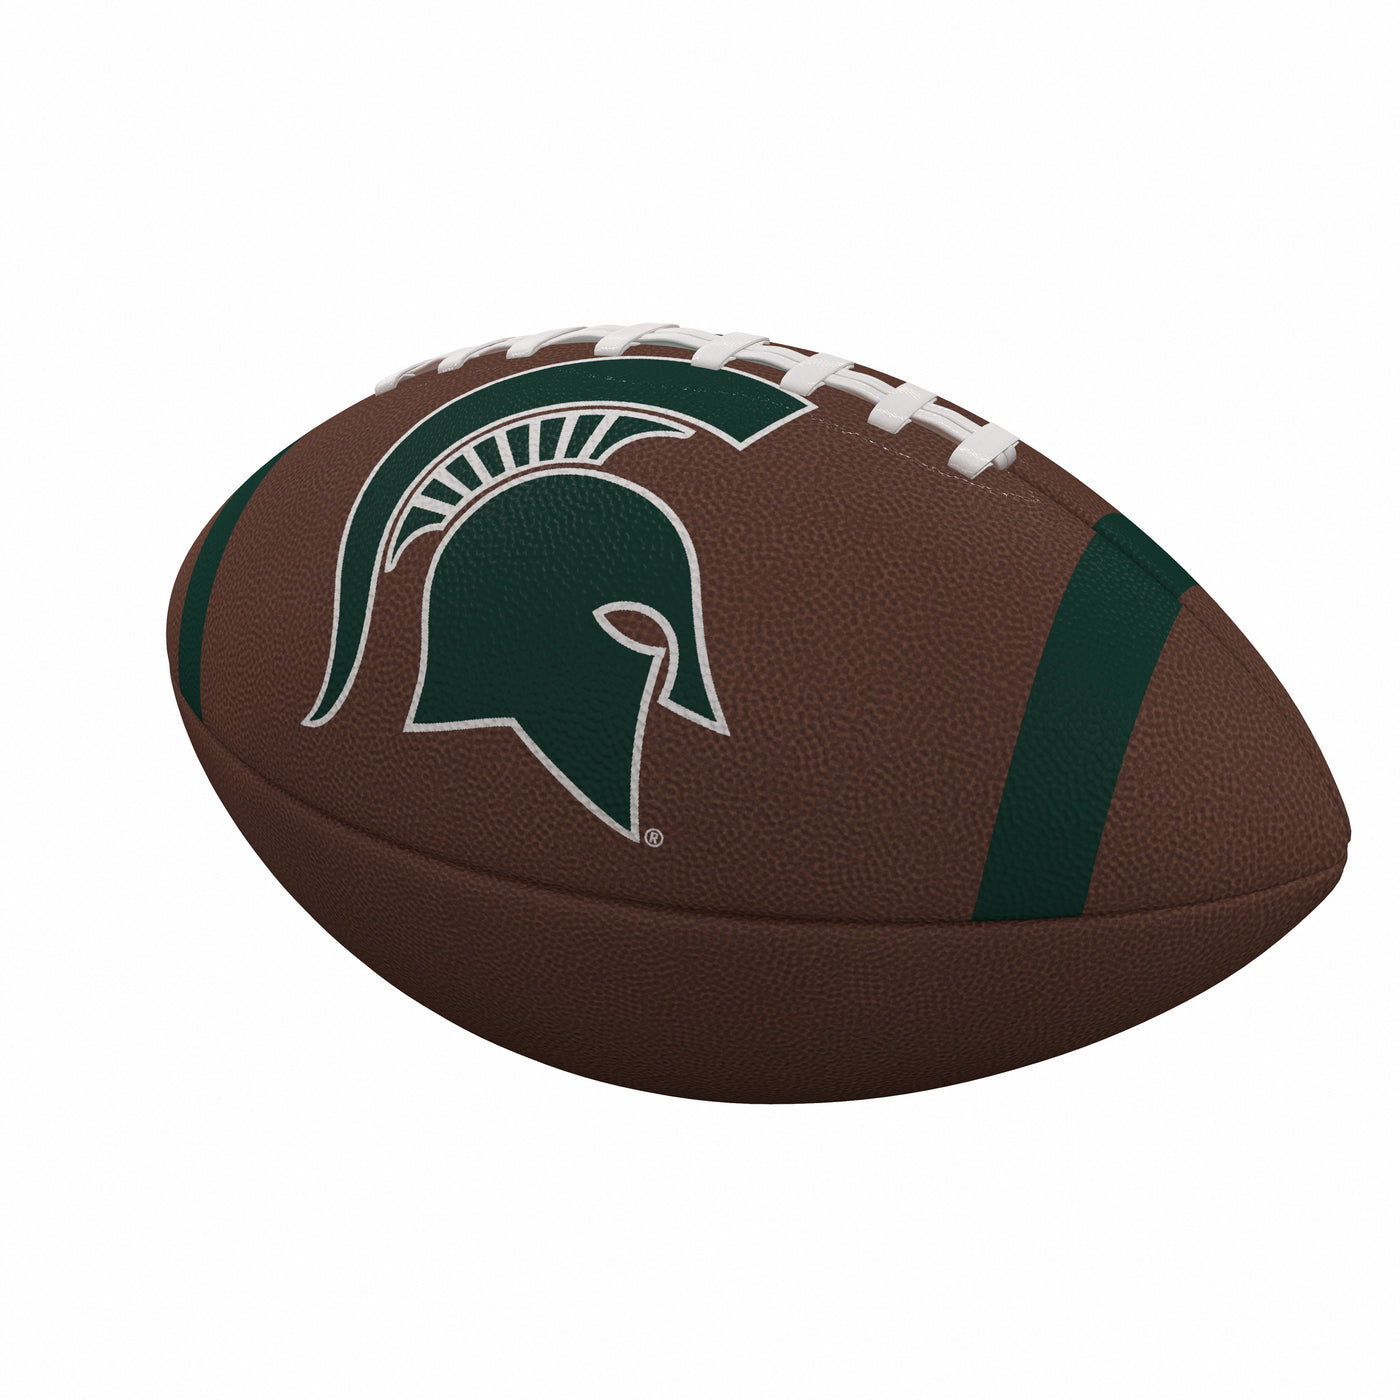 MI State Team Stripe Official-Size Composite Football